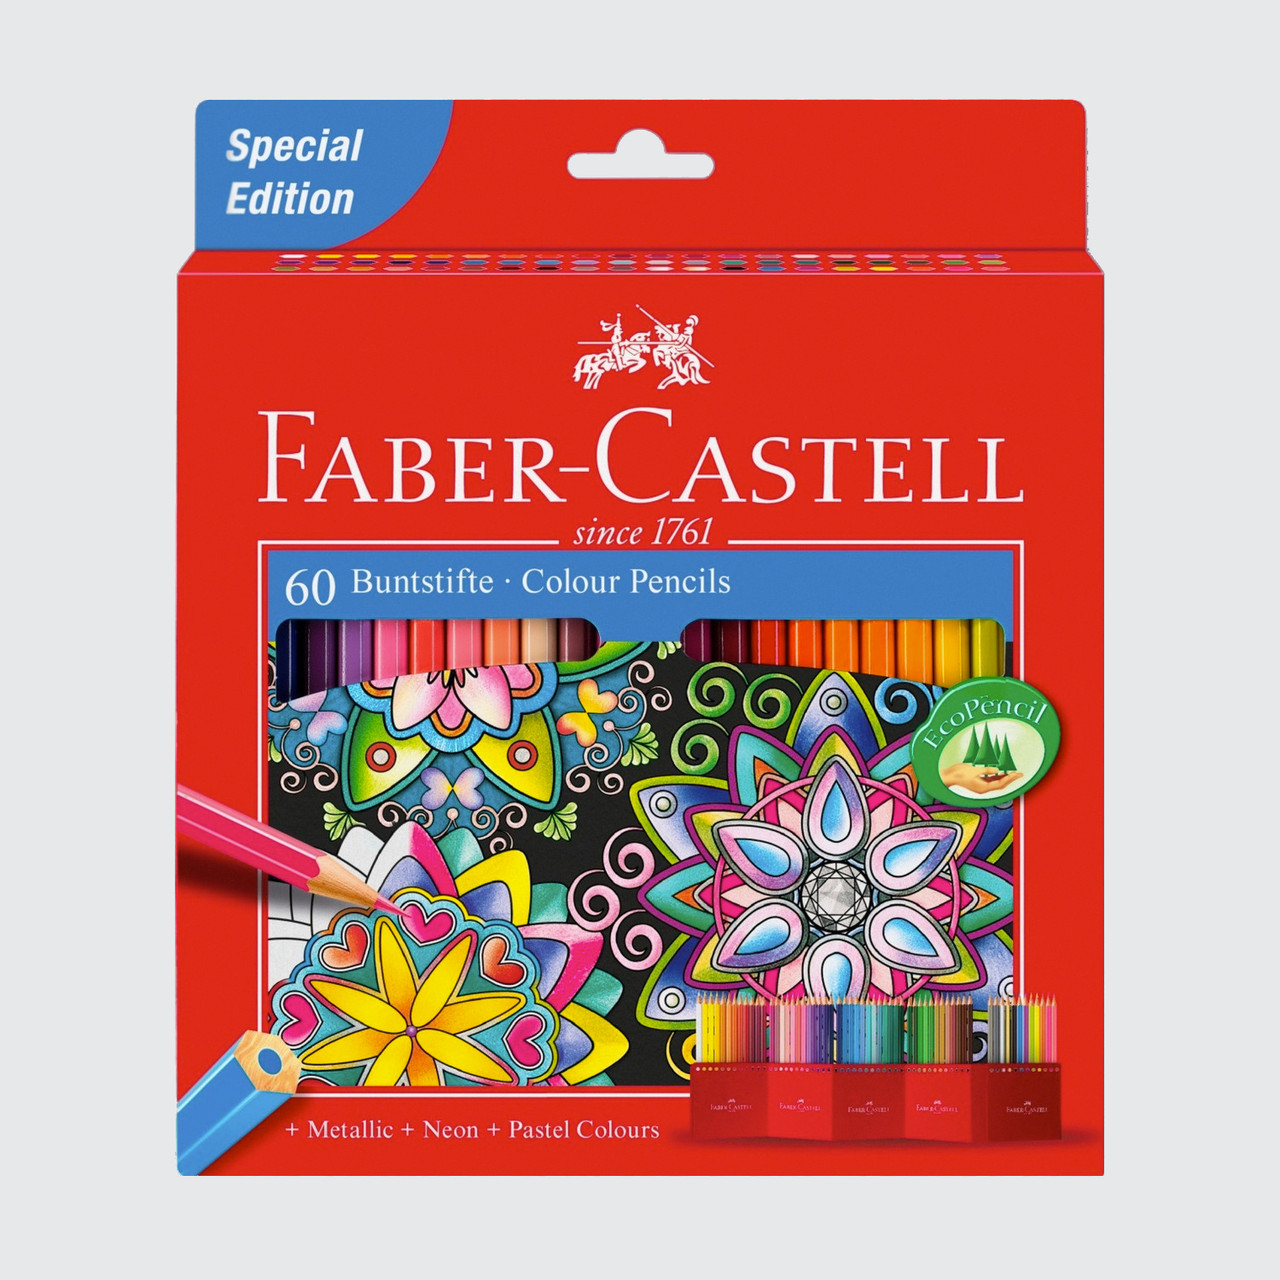 Faber-Castell Faber Castell Classic Pencils Assorted Colours Set of 60